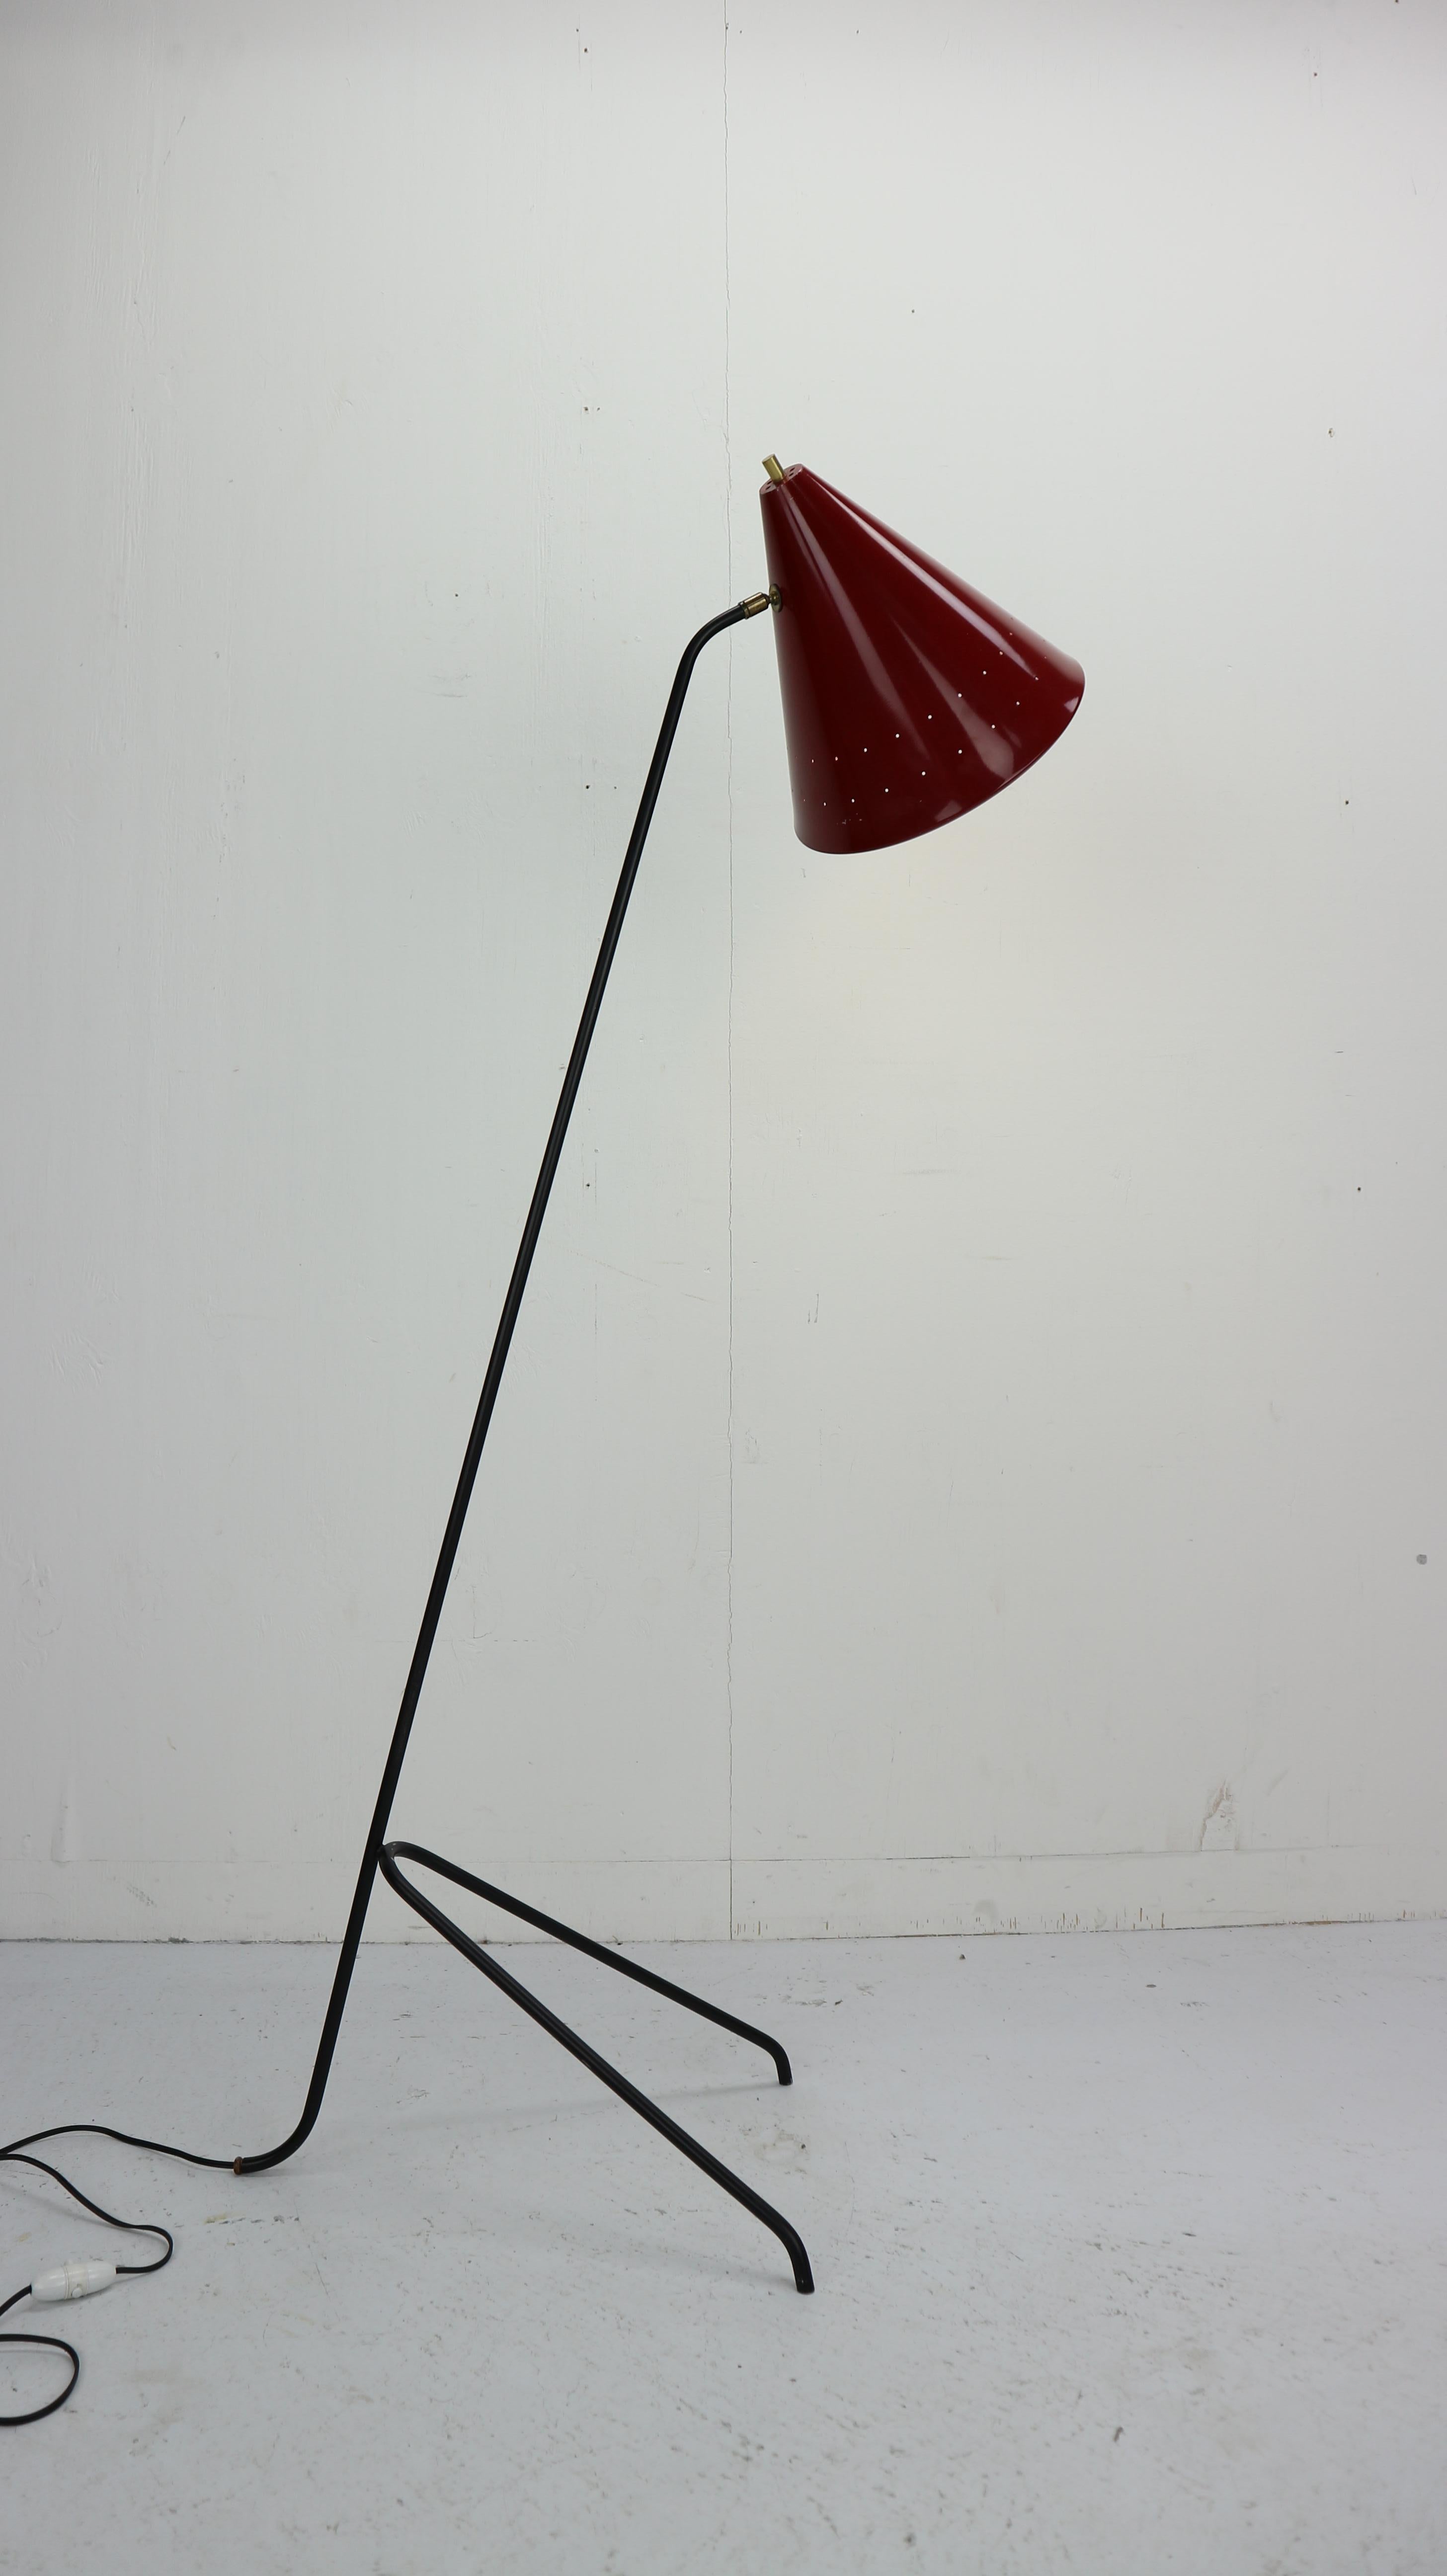 This black and red Minimalist floor light was produced by Dutch lighting company Hagoort in the 1950s after a design by Willem Hagoort. It has a great subtle minimal design that was clearly influenced by Italian examples such as Arteluce. The lamp